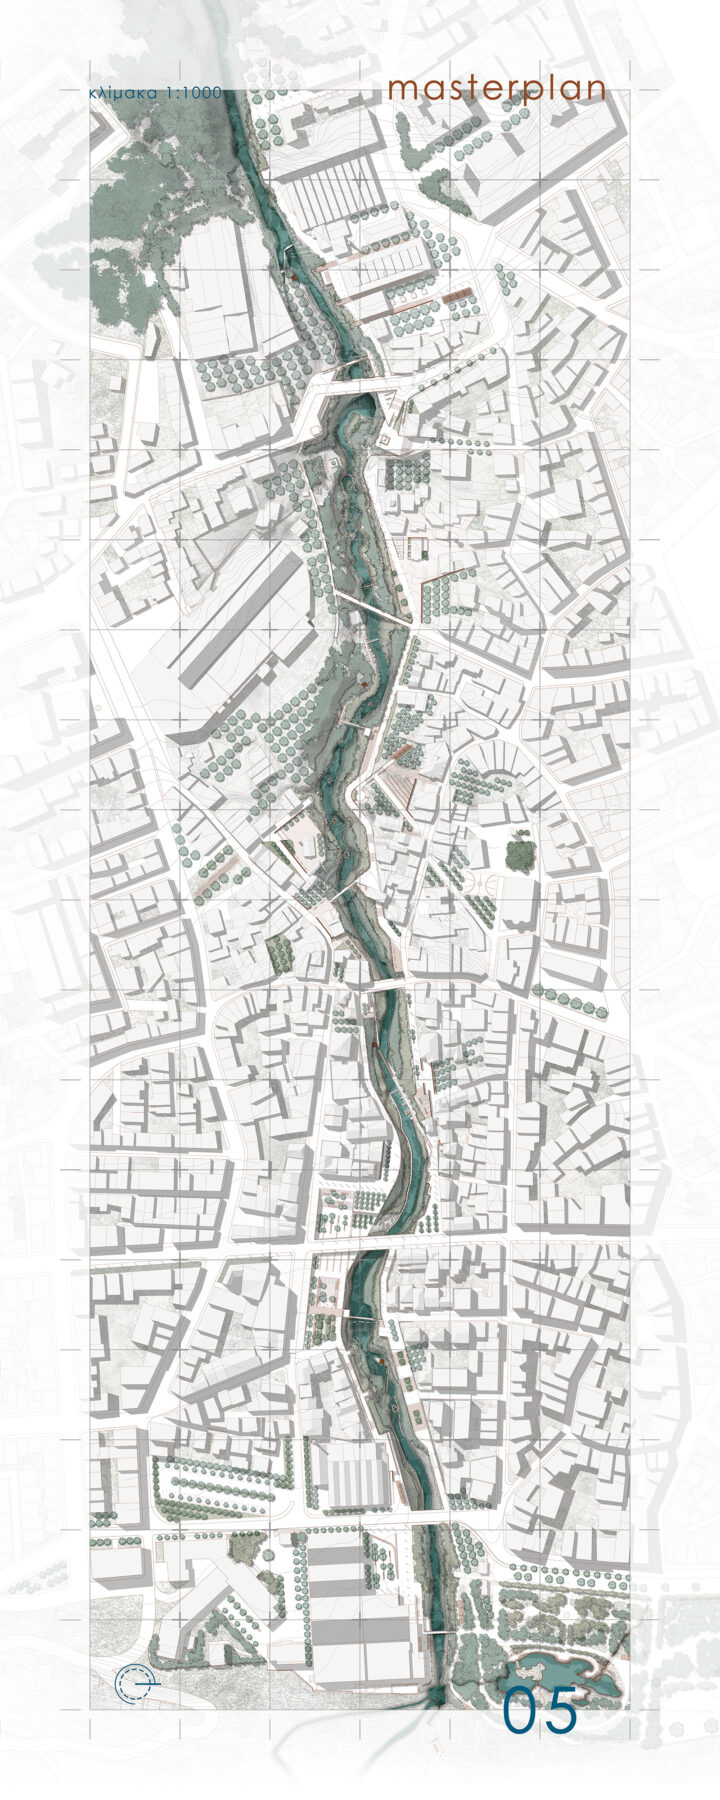 Archisearch Redefining the relationship between the city and the river: the case of Arapitsa river in the city of Naoussa | Diploma thesis by Vasiliki Giagkoula